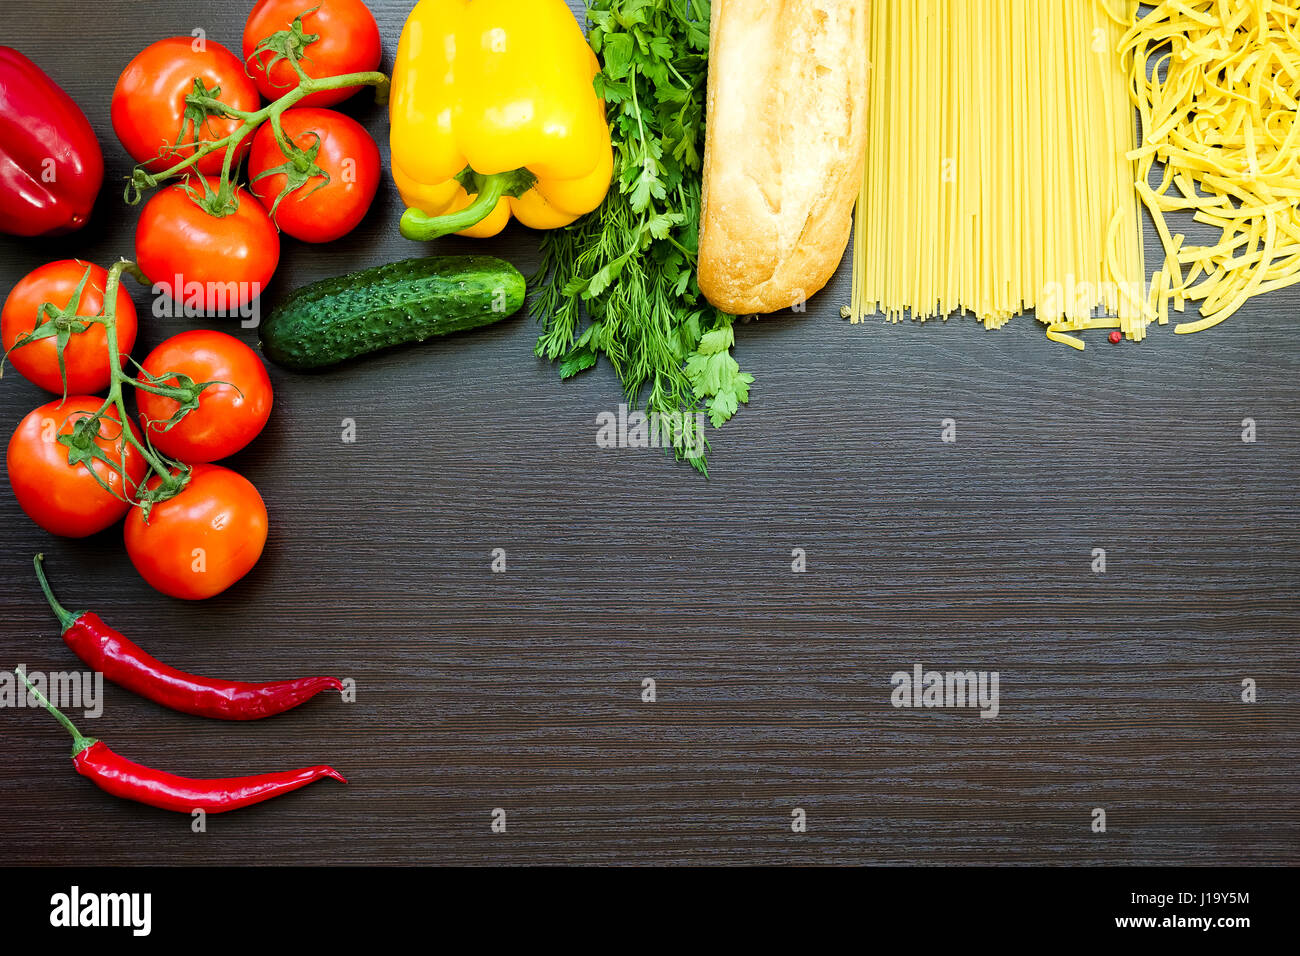 Vegetarian food, health or cooking concept. Stock Photo